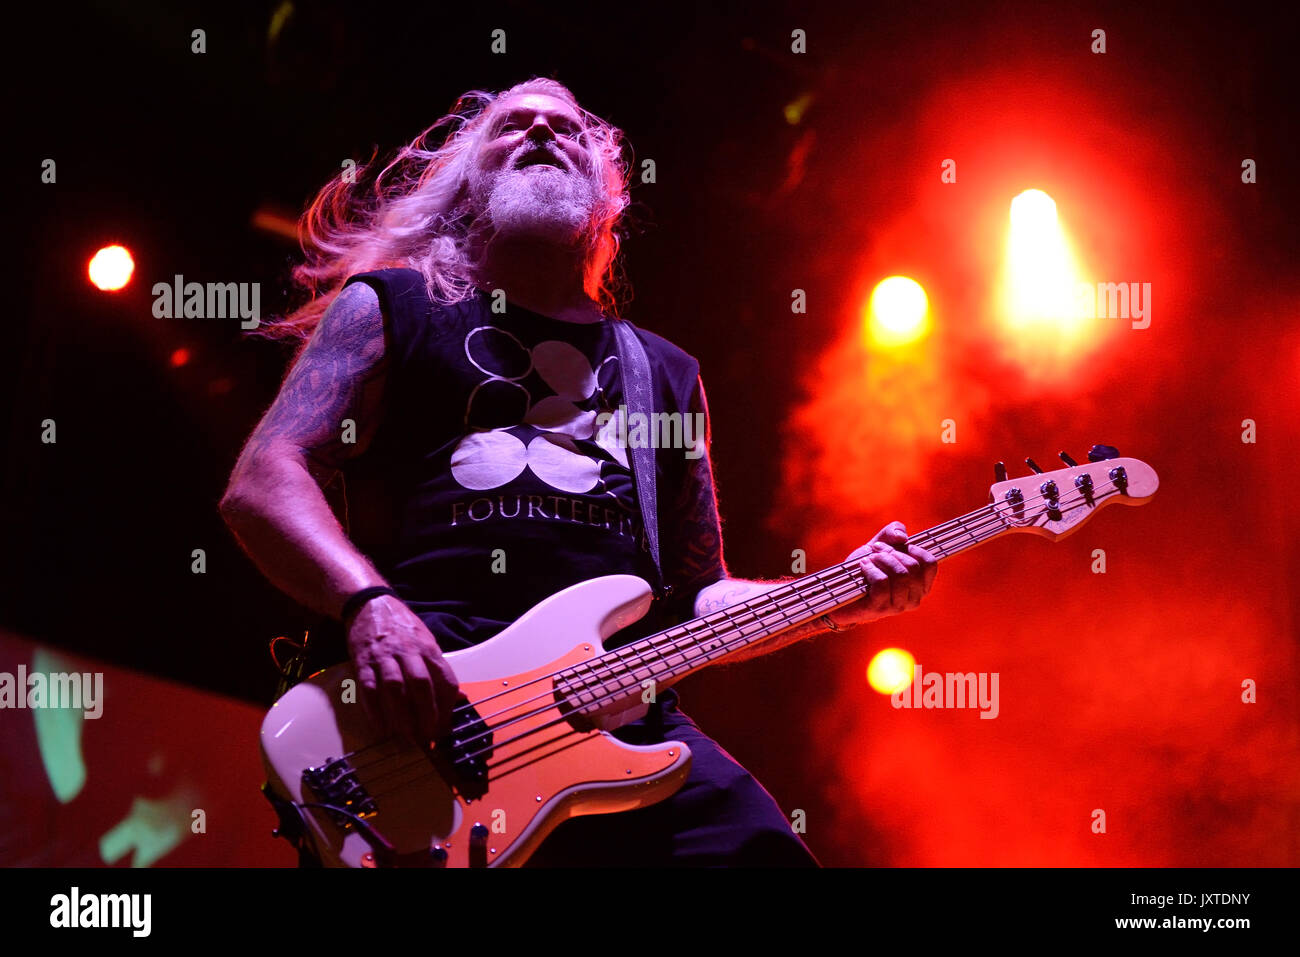 MADRID - JUN 22: Dark Tranquility (melodic death metal music band) perform in concert at Download (heavy metal music festival) on June 22, 2017 in Mad Stock Photo